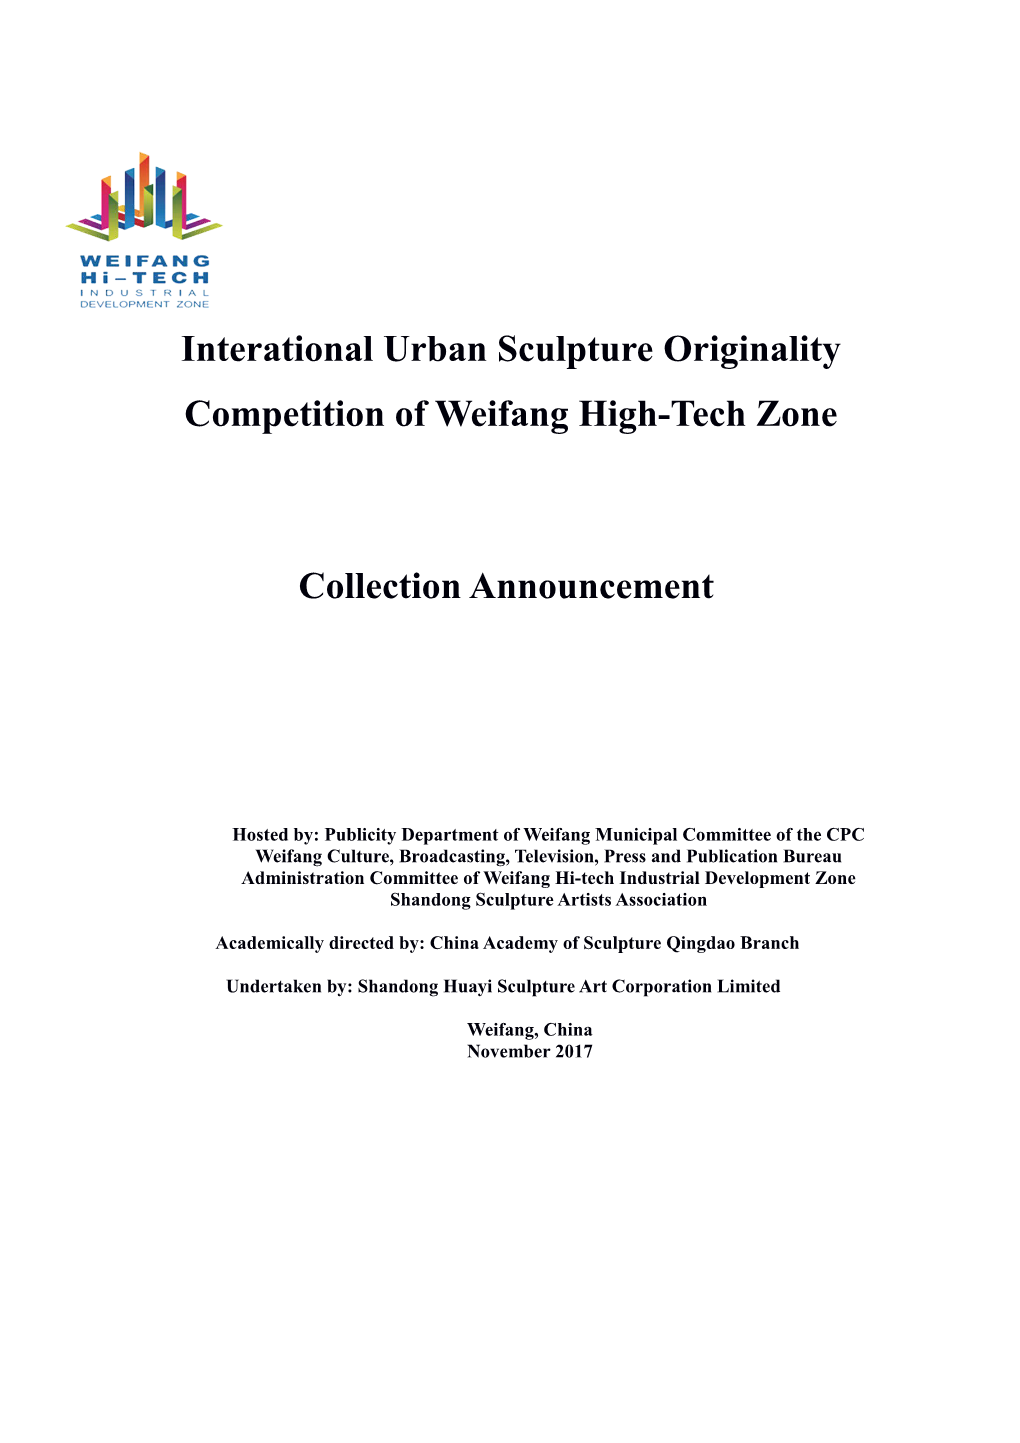 Interational Urban Sculpture Originality Competition of Weifang High-Tech Zone